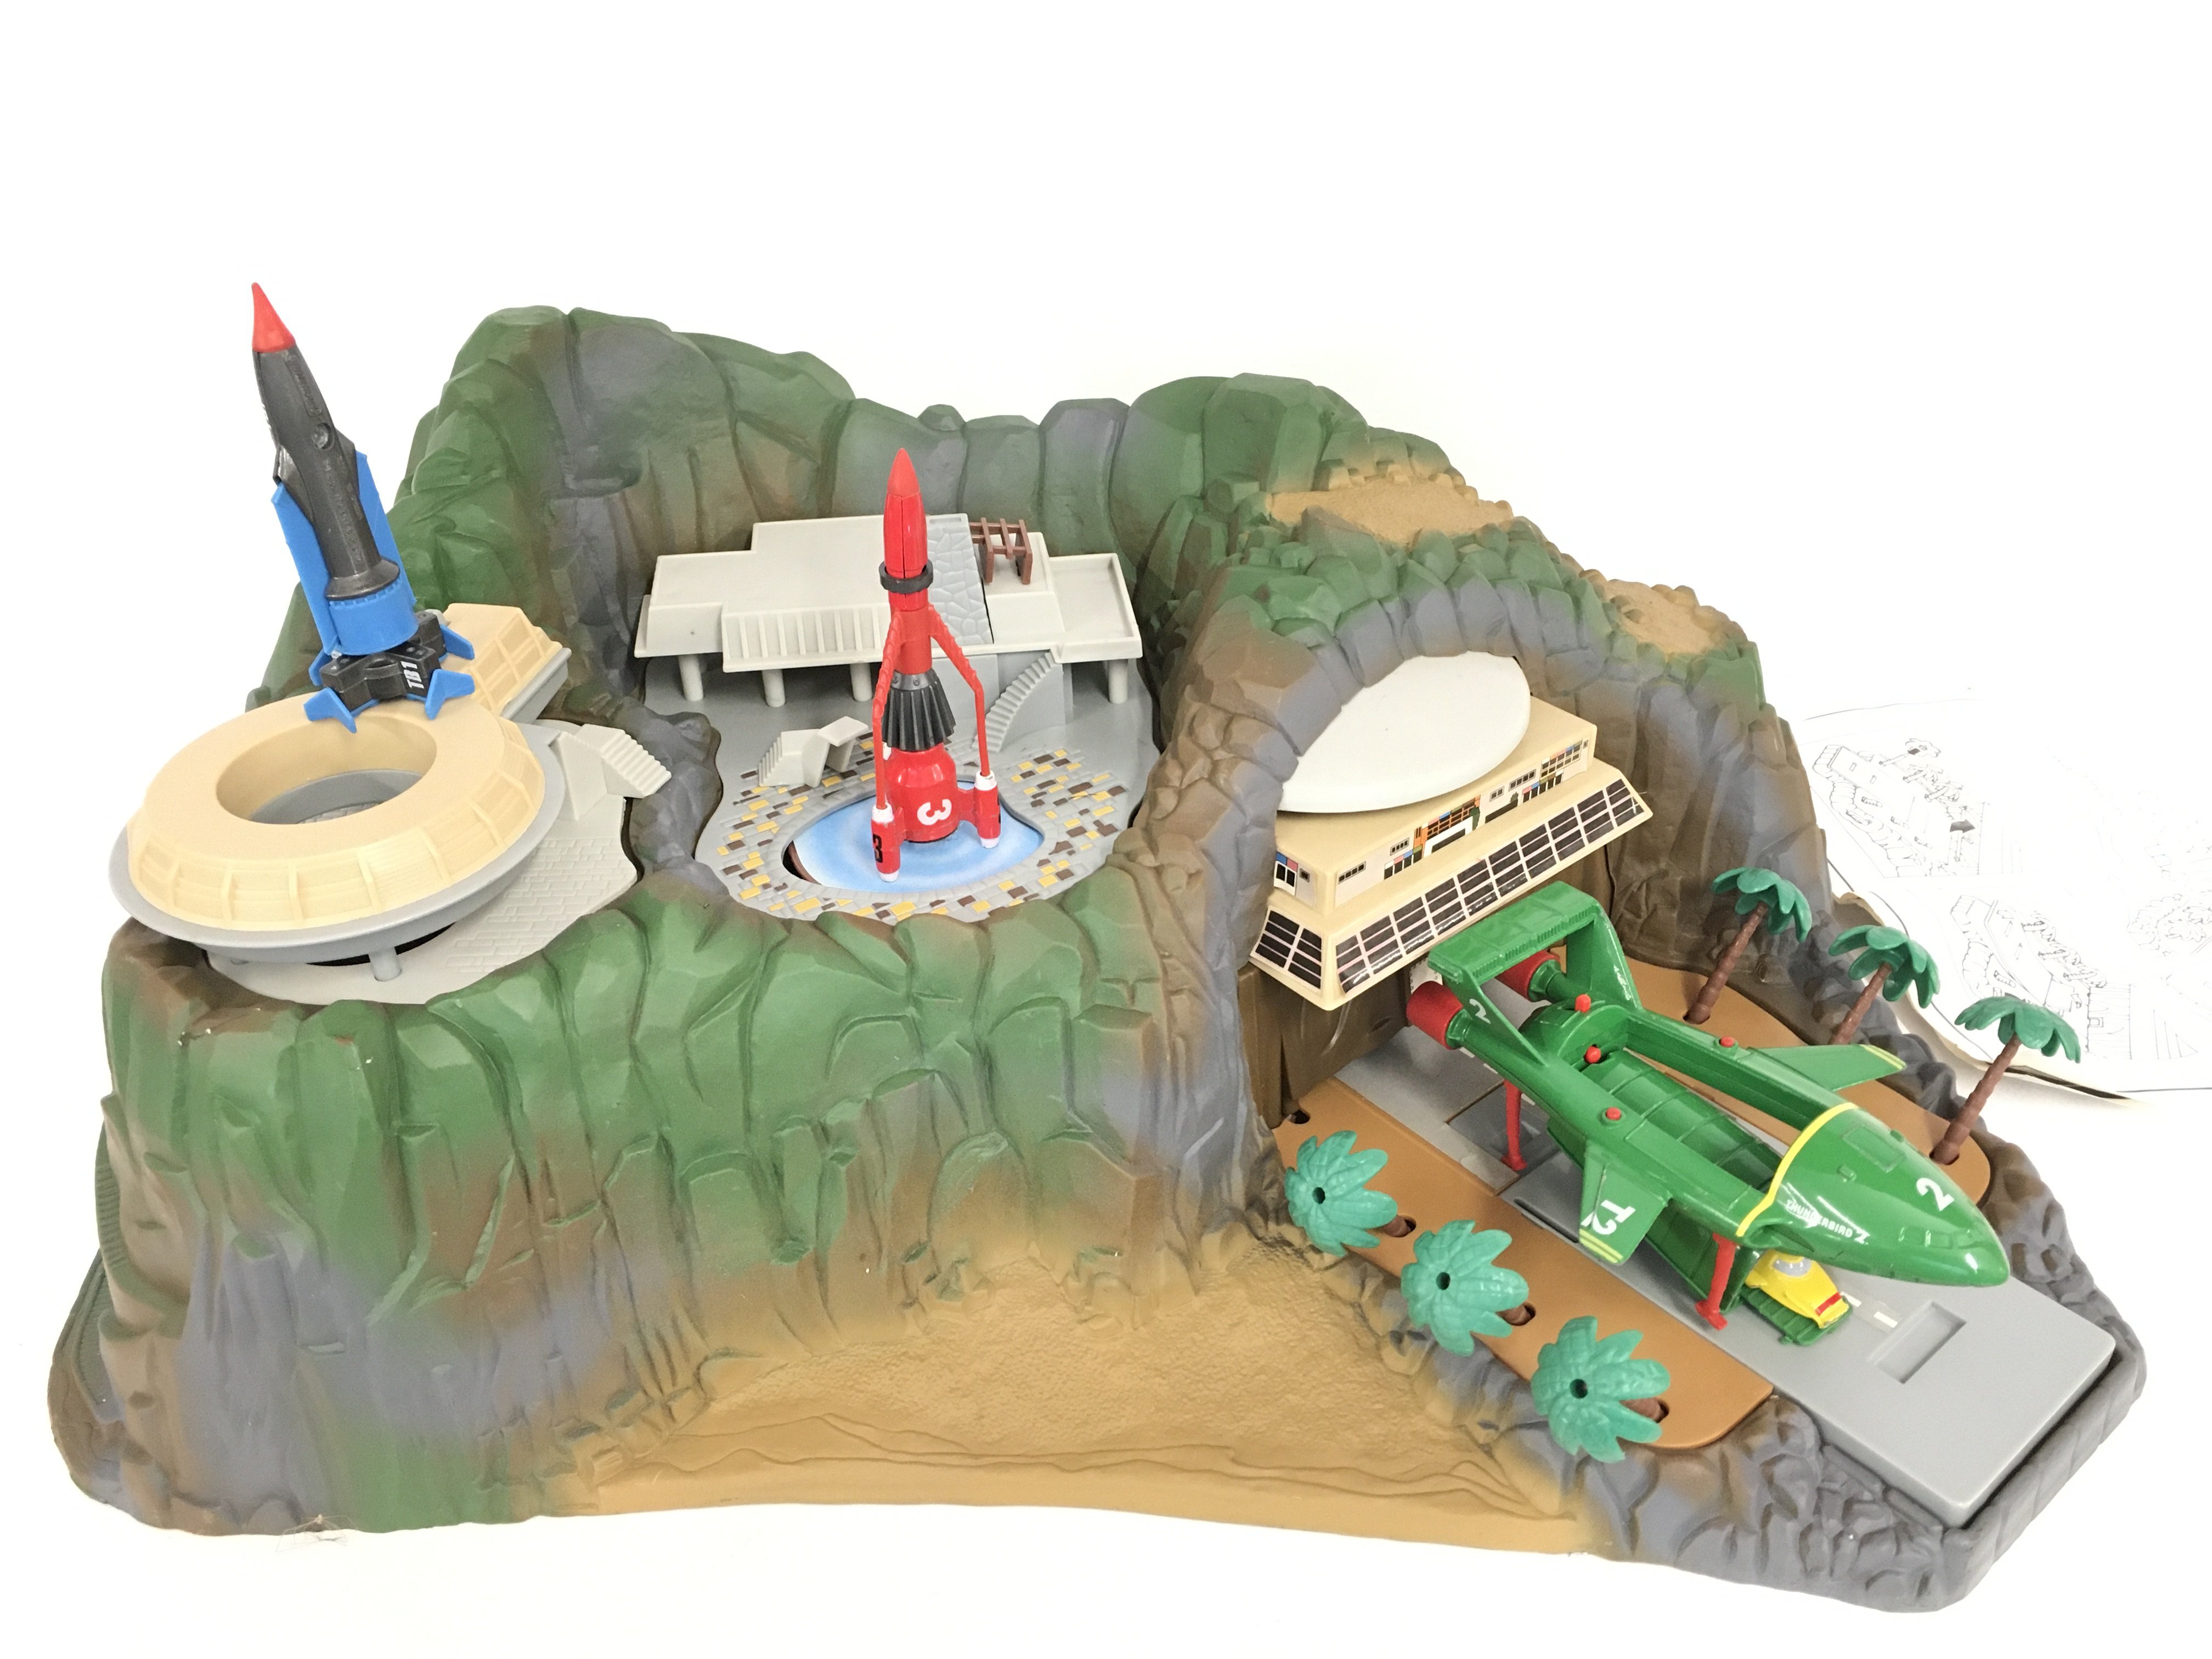 A Boxed Thunderbirds Tracey Island with Vehicles.